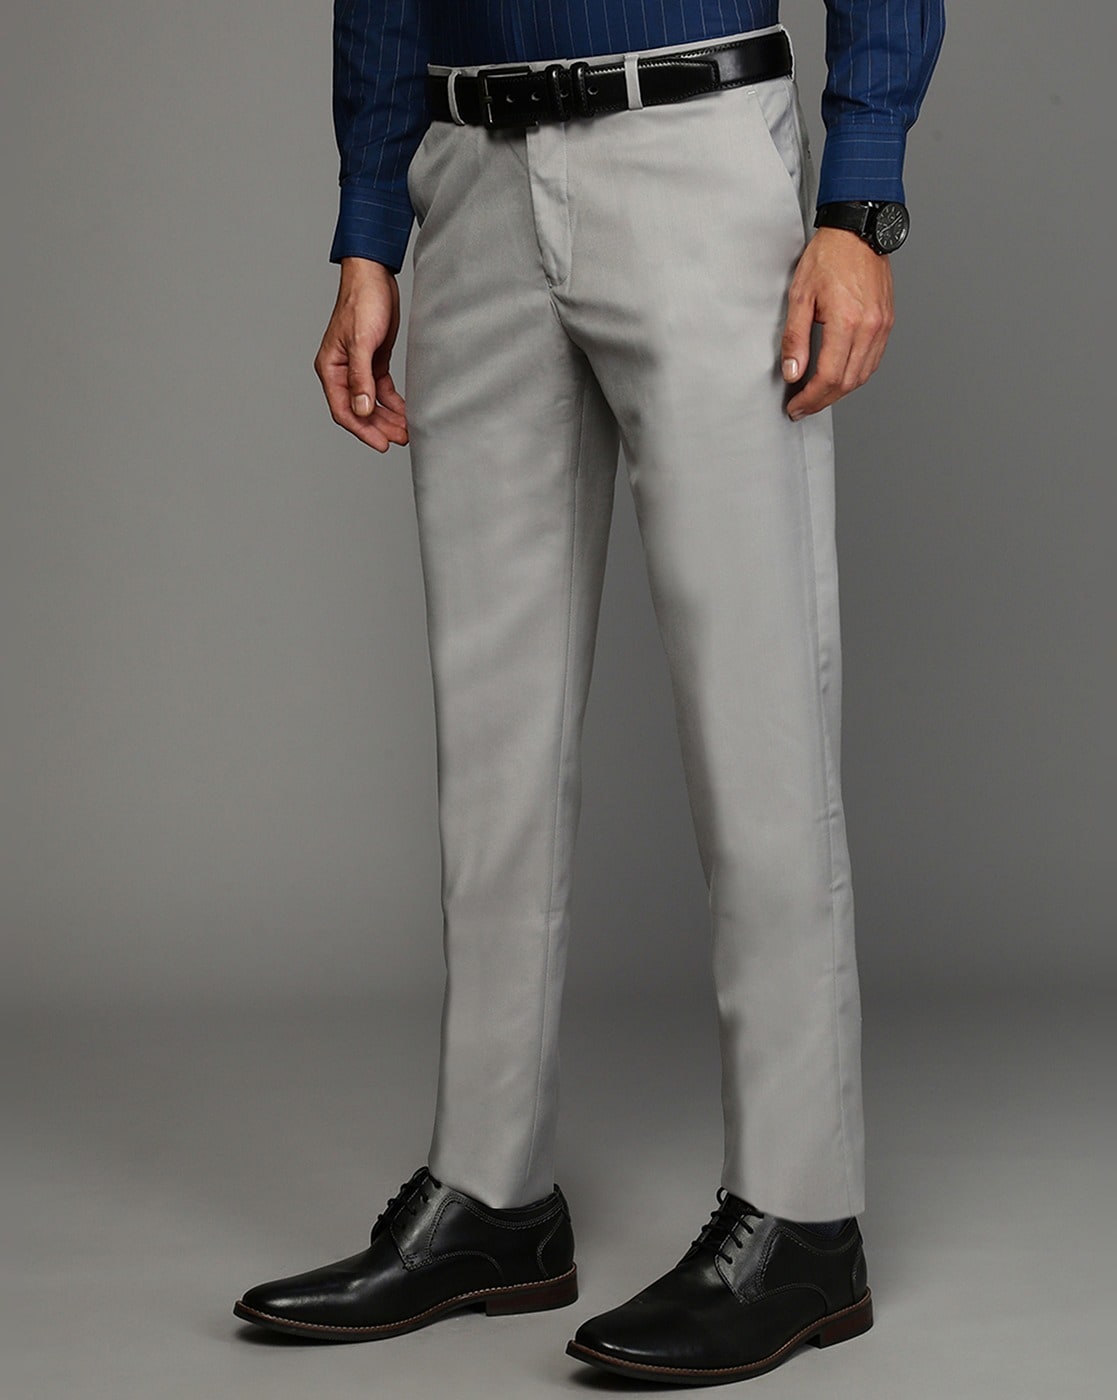 Newest Grey Men Suit Pants Custom Made Cheap Slim Fit Trousers Trousers  Groom Best Man Formal Wear From Huifangzou, $37.19 | DHgate.Com